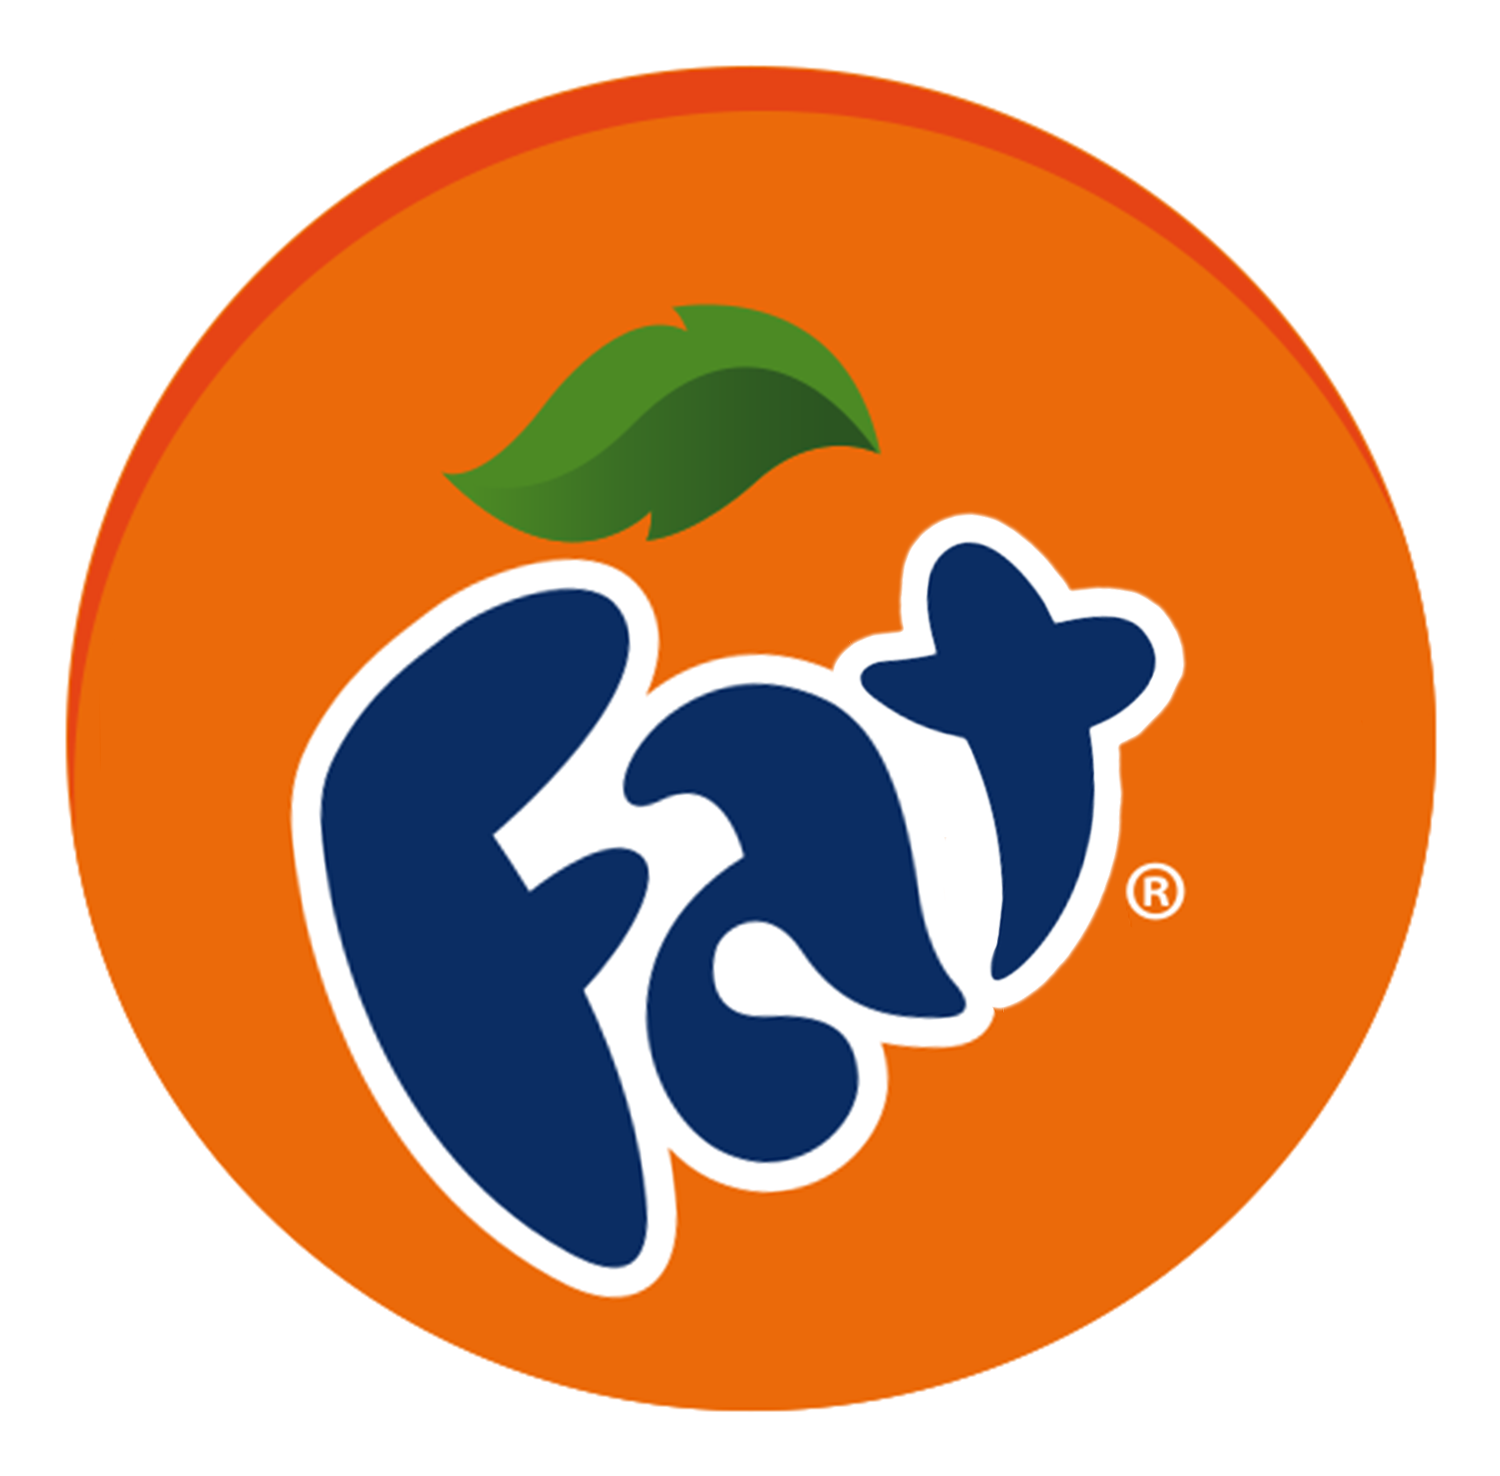 Fanta Thinking About a Logo Change To Be PNG